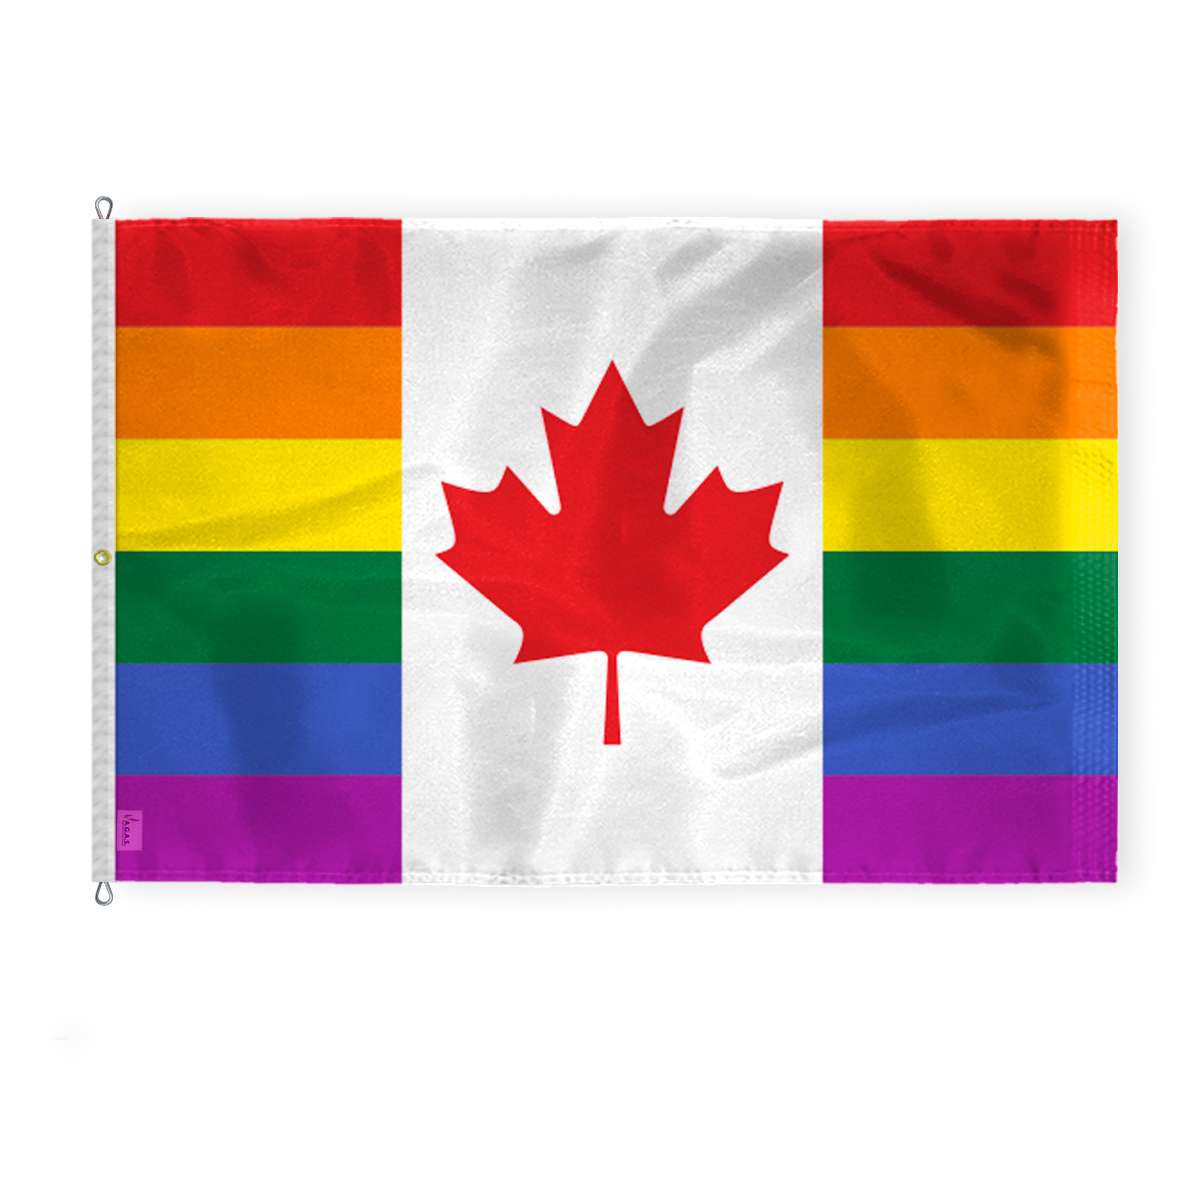 AGAS Large Canada Pride Flag 8x12 Ft - Printed 200D Nylon